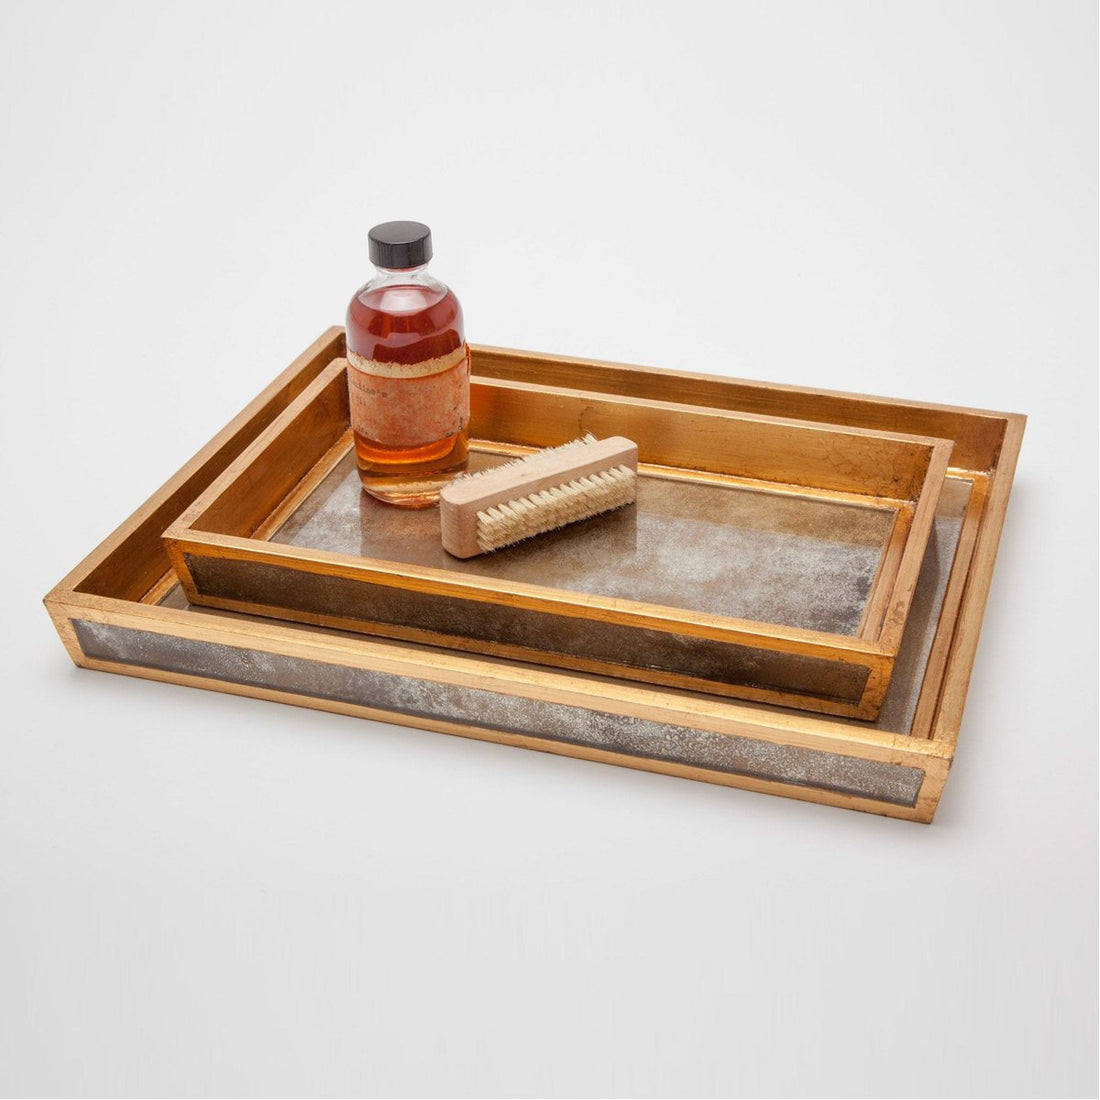 Pigeon and Poodle Atwater Rectangular Tray - Tapered, 2-Piece Set